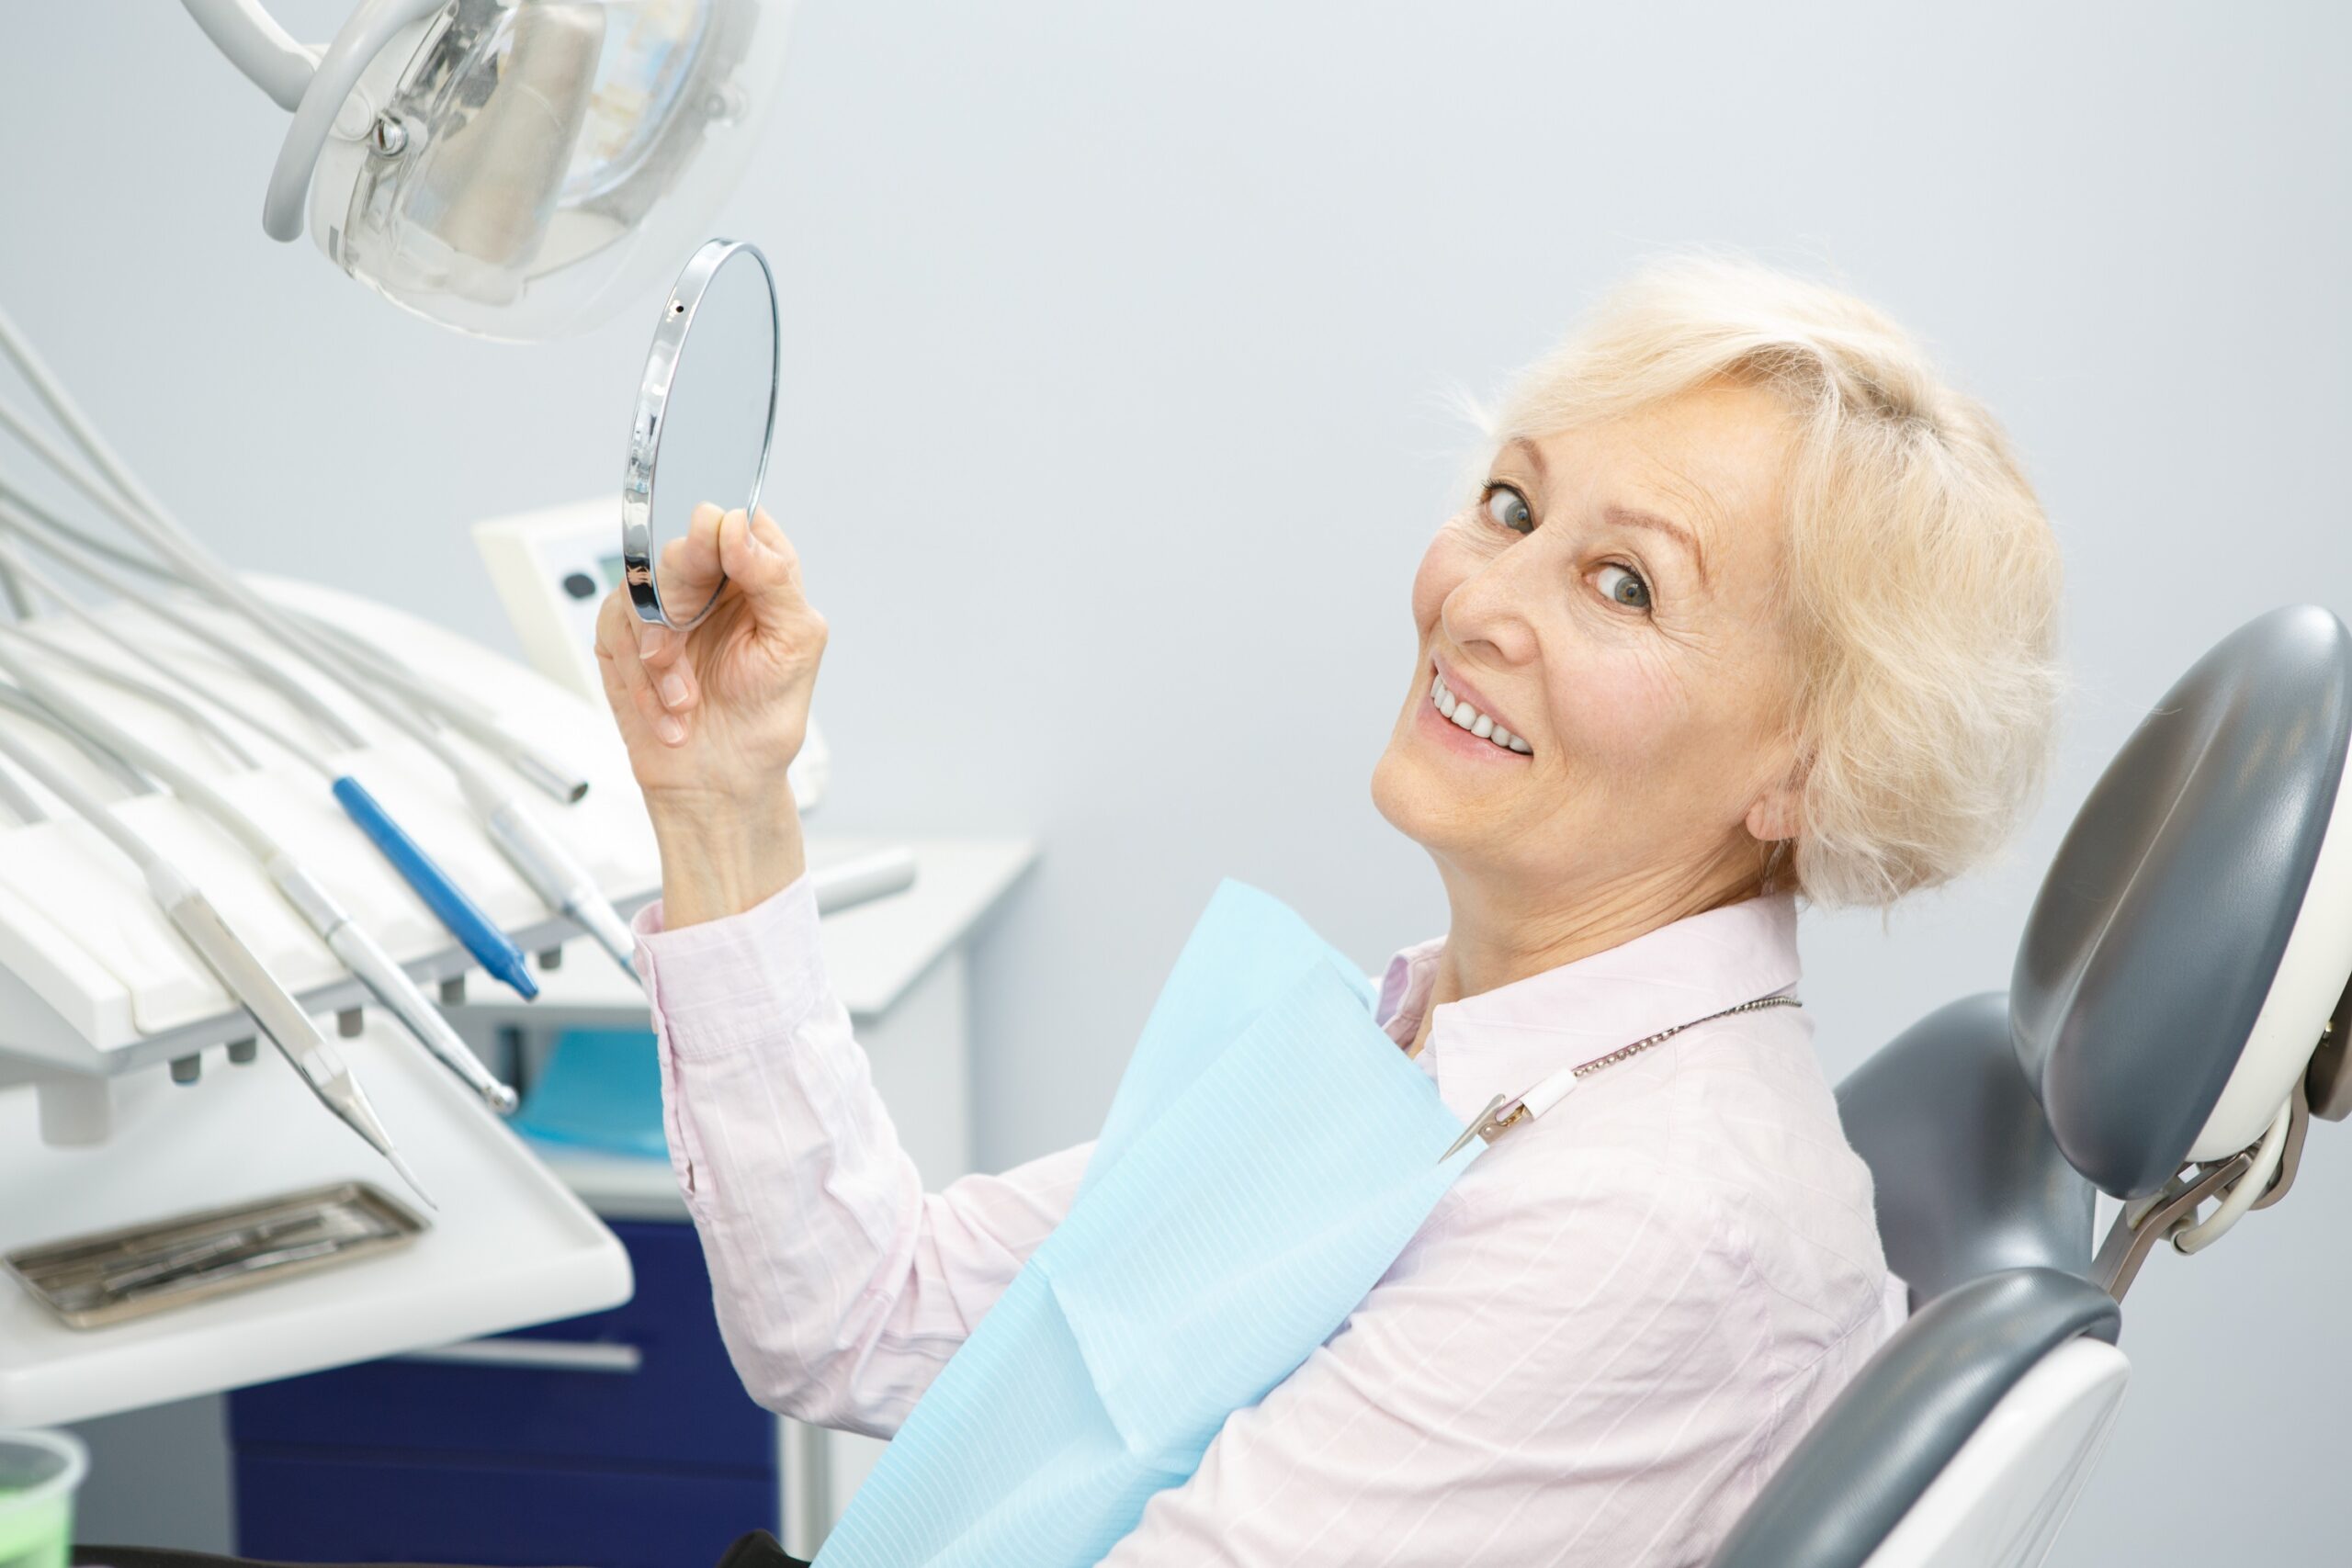 An image of a woman at a dental practice.